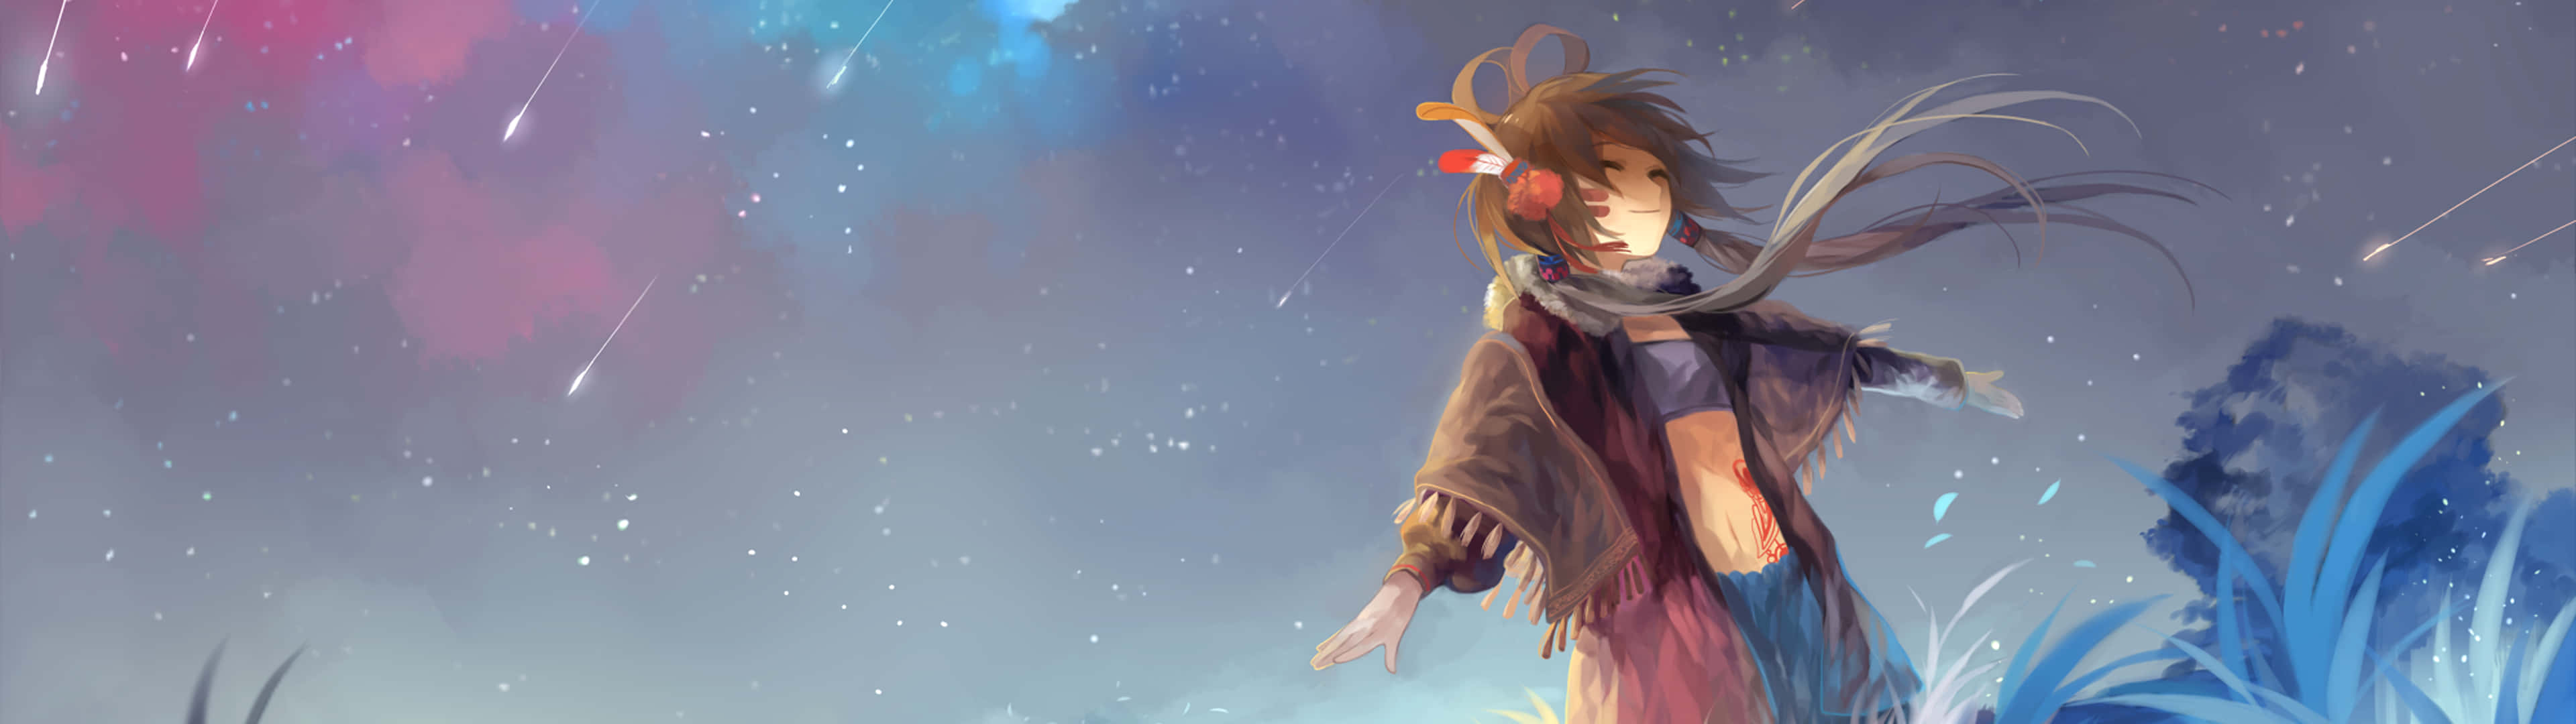 3840x1080 Photo Anime Girl Picture